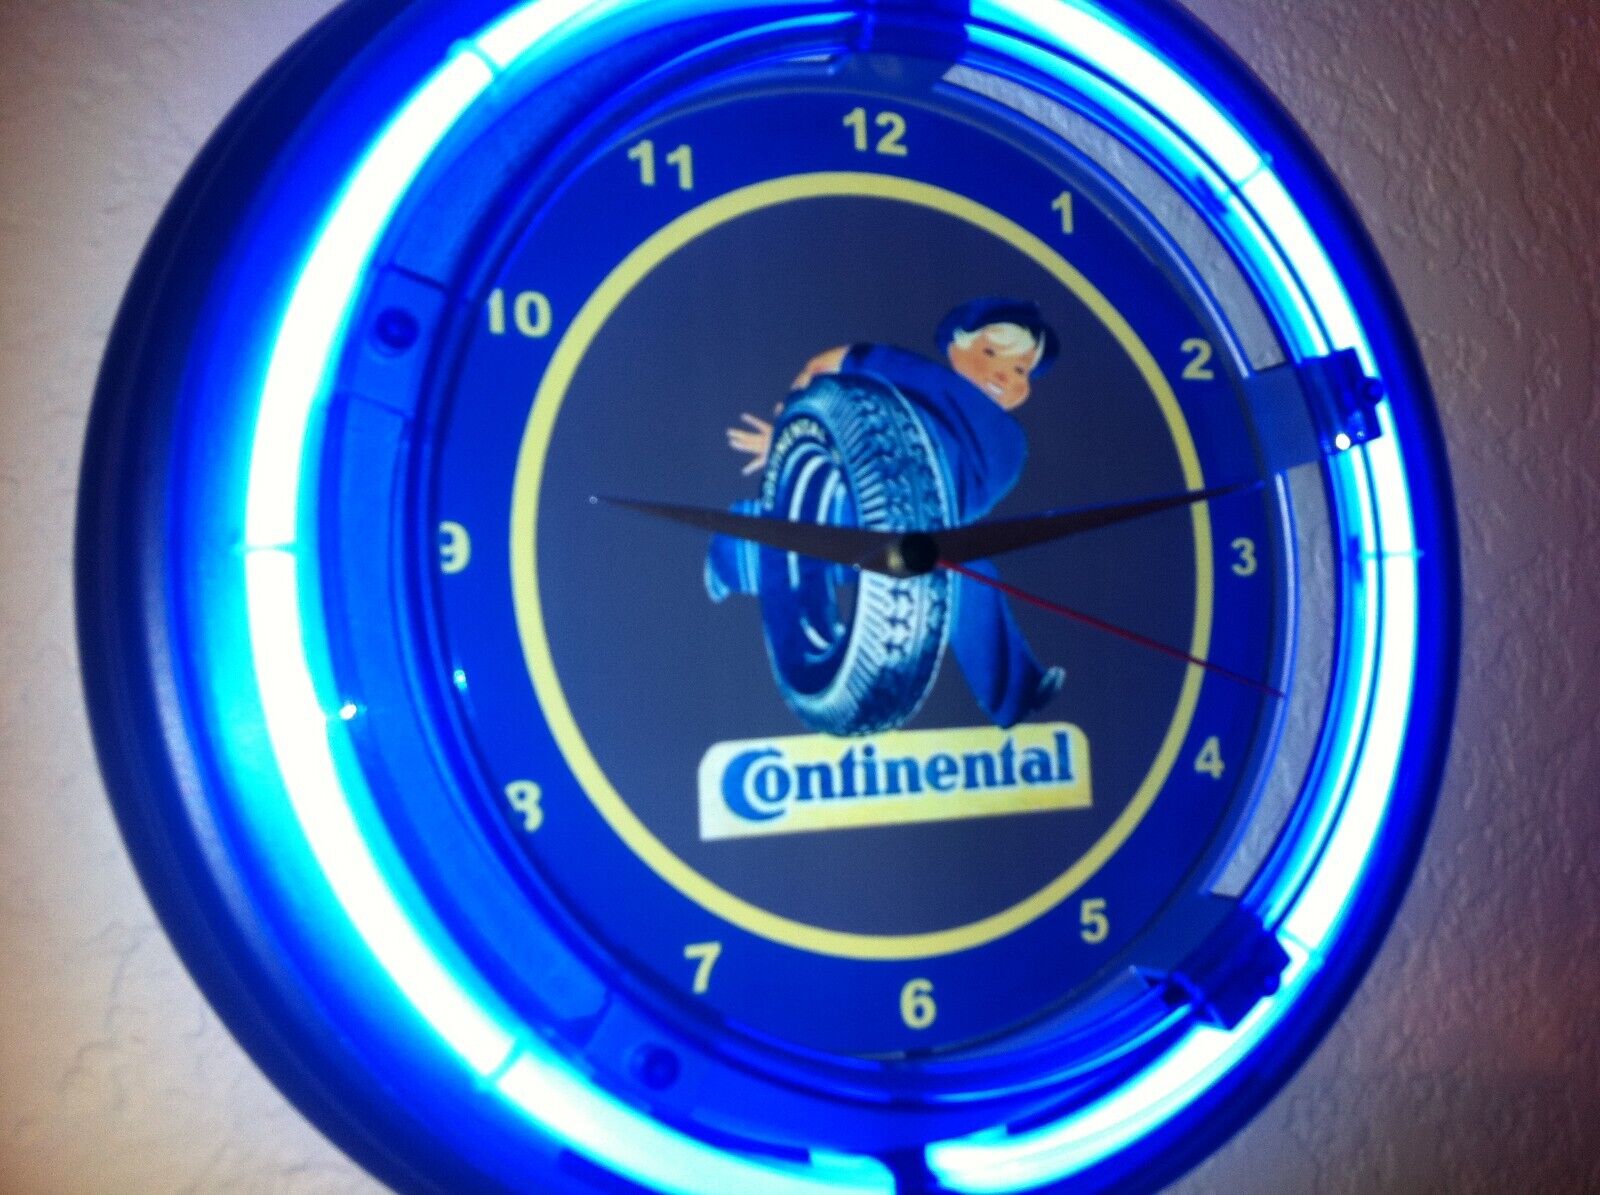 Continental Tires Gas Station Man Cave Bar Neon Wall Clock Advertising Sign